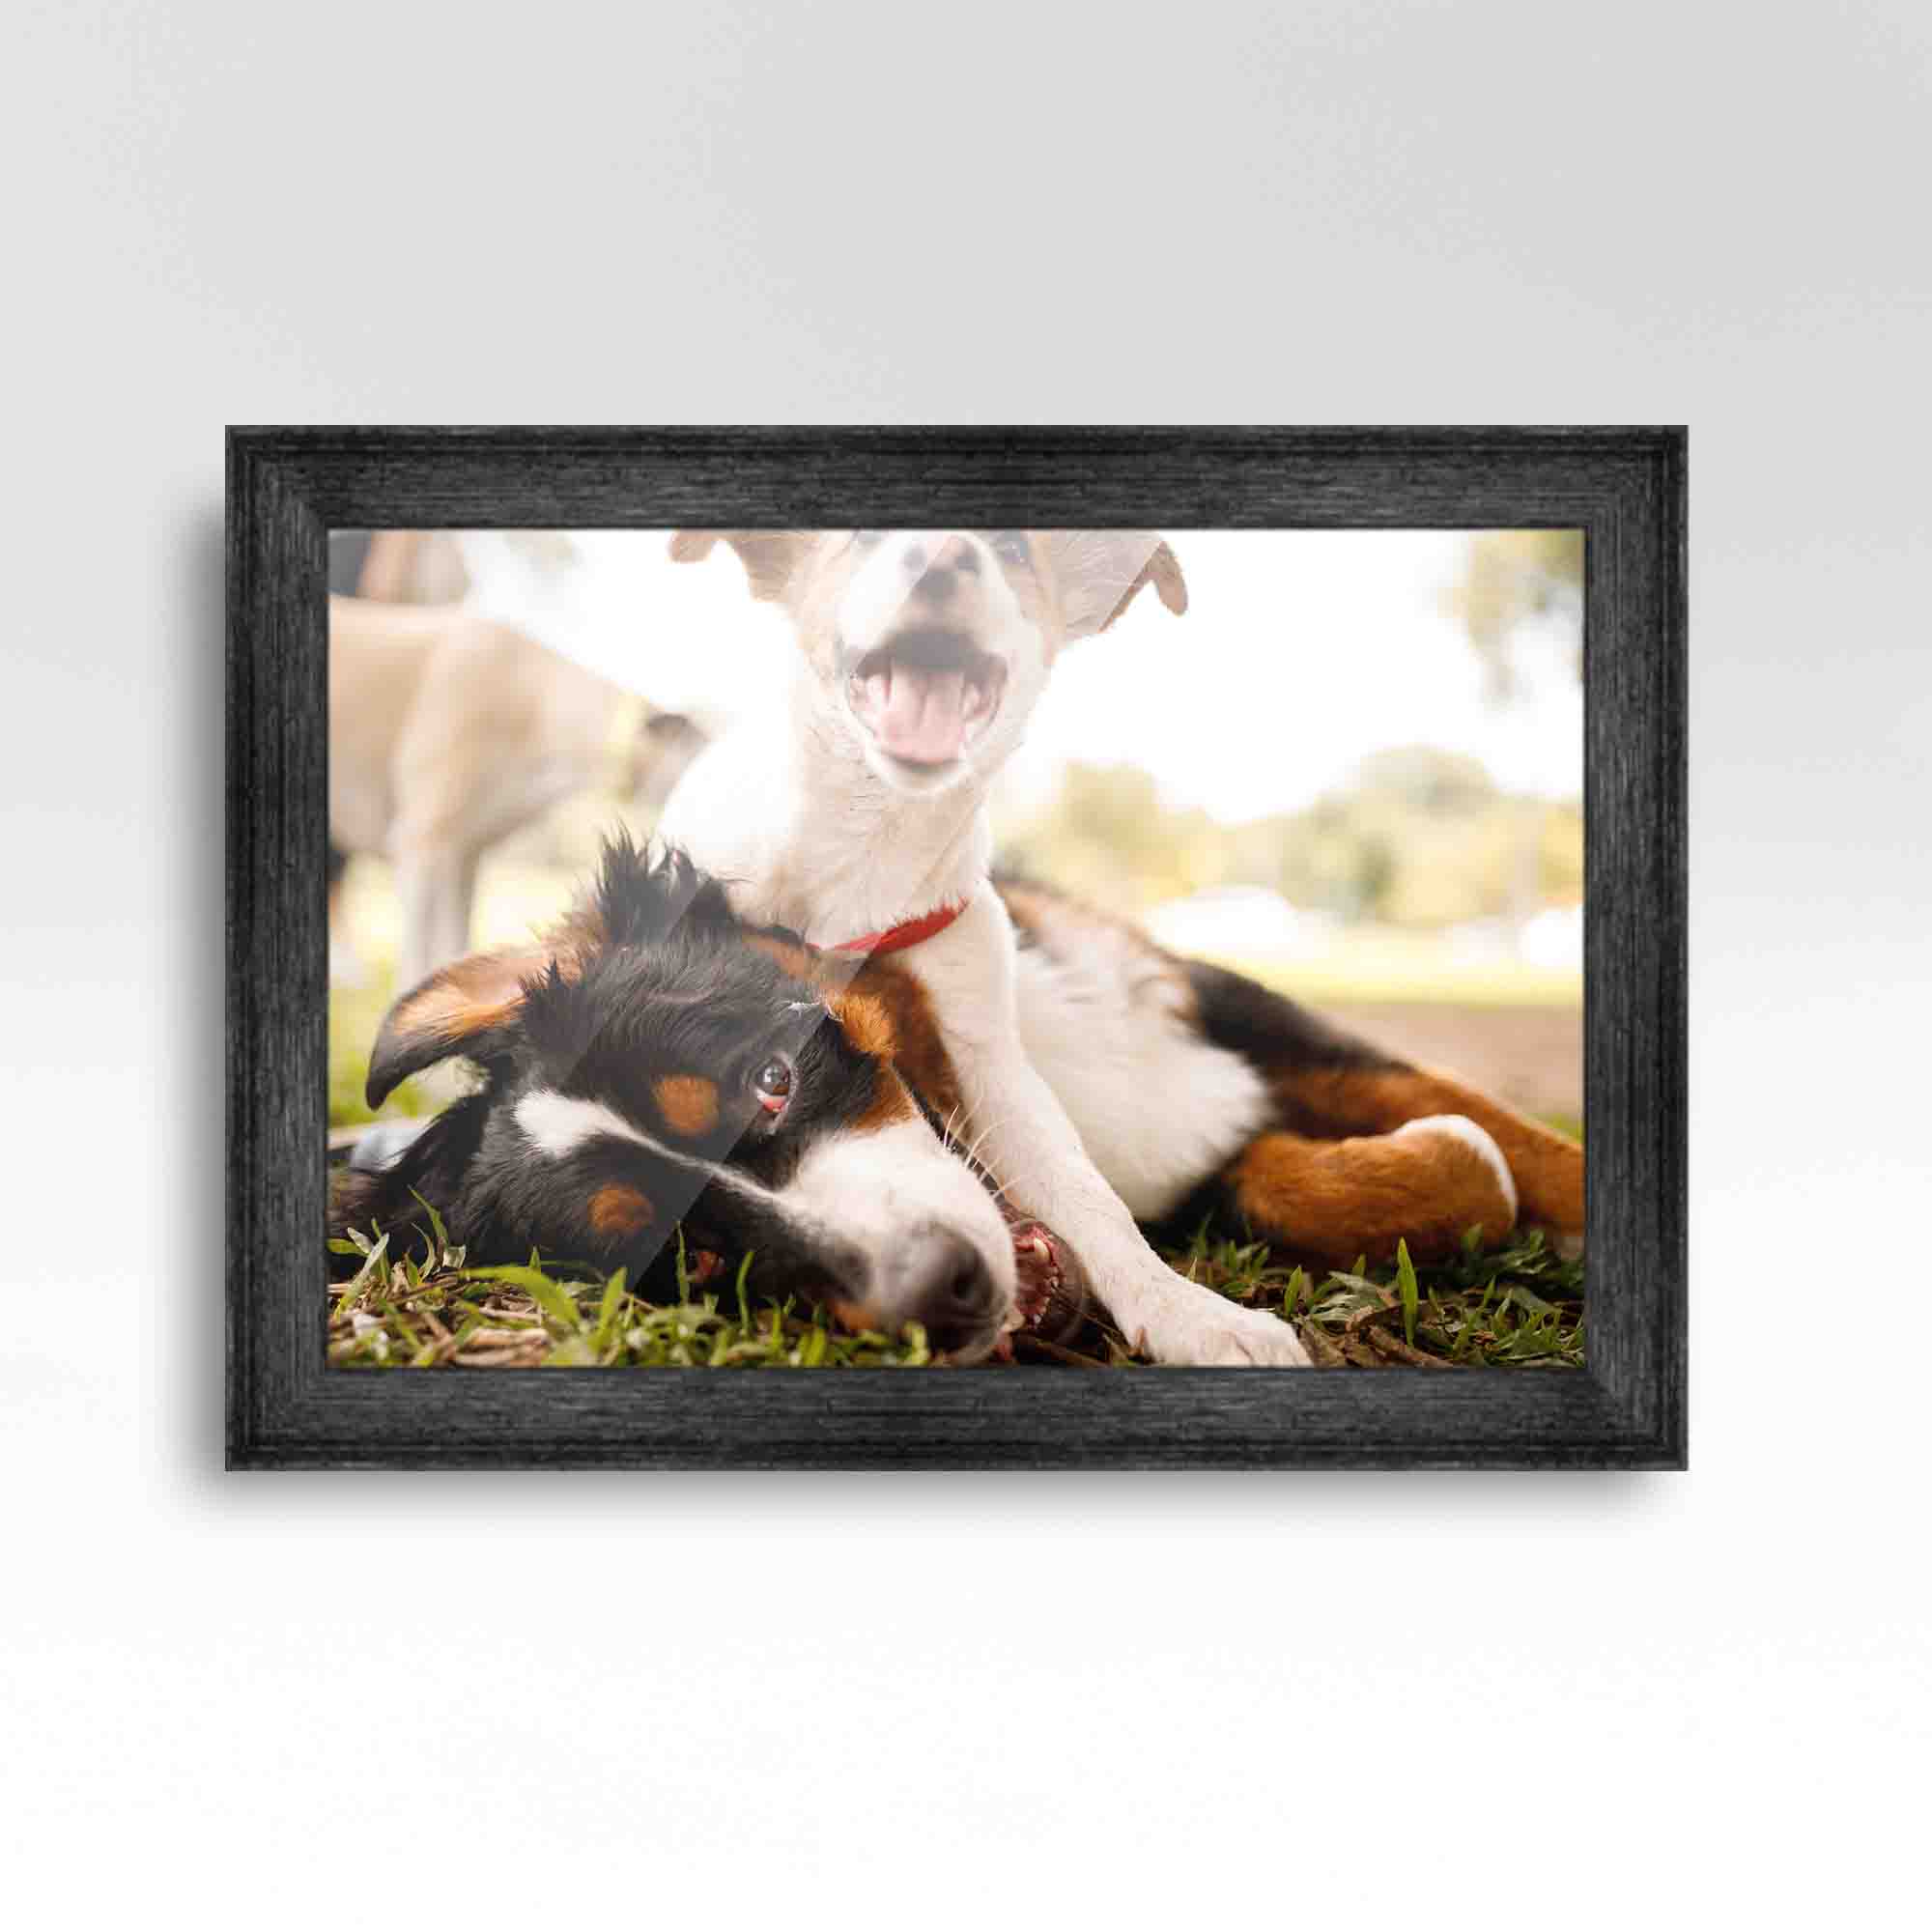 CustomPictureFrames.com 12x9 Frame Black Real Wood Picture Frame Width 1.5 inches | Interior Frame Depth 0.5 inches | Barn Black Distressed Photo Frame